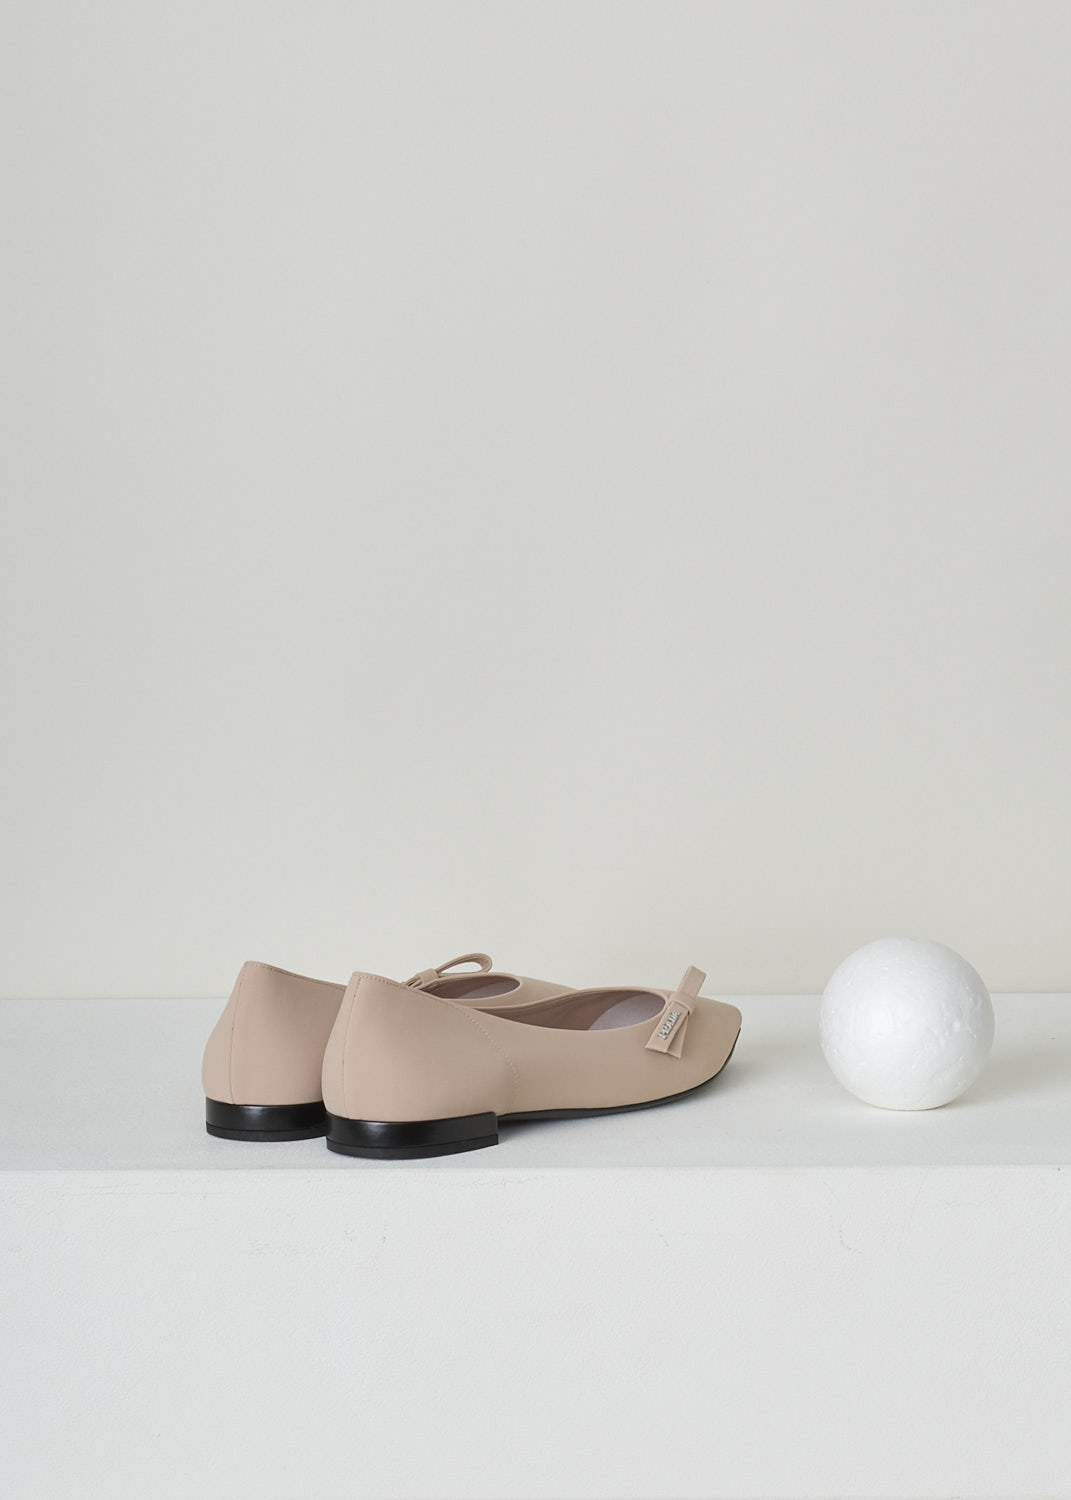 PRADA, NUDE BALLET FLATS WITH POINTED TOE, TESSUTO_TECH_1F273L_3KQ6_F0A48_NUDO, Pink, Beige, Back, These nude colored ballet flats have a pointed toe with, along the topline, a bow with the brand's name in silver-toned letters. These slip-in flats have a small heel. 
